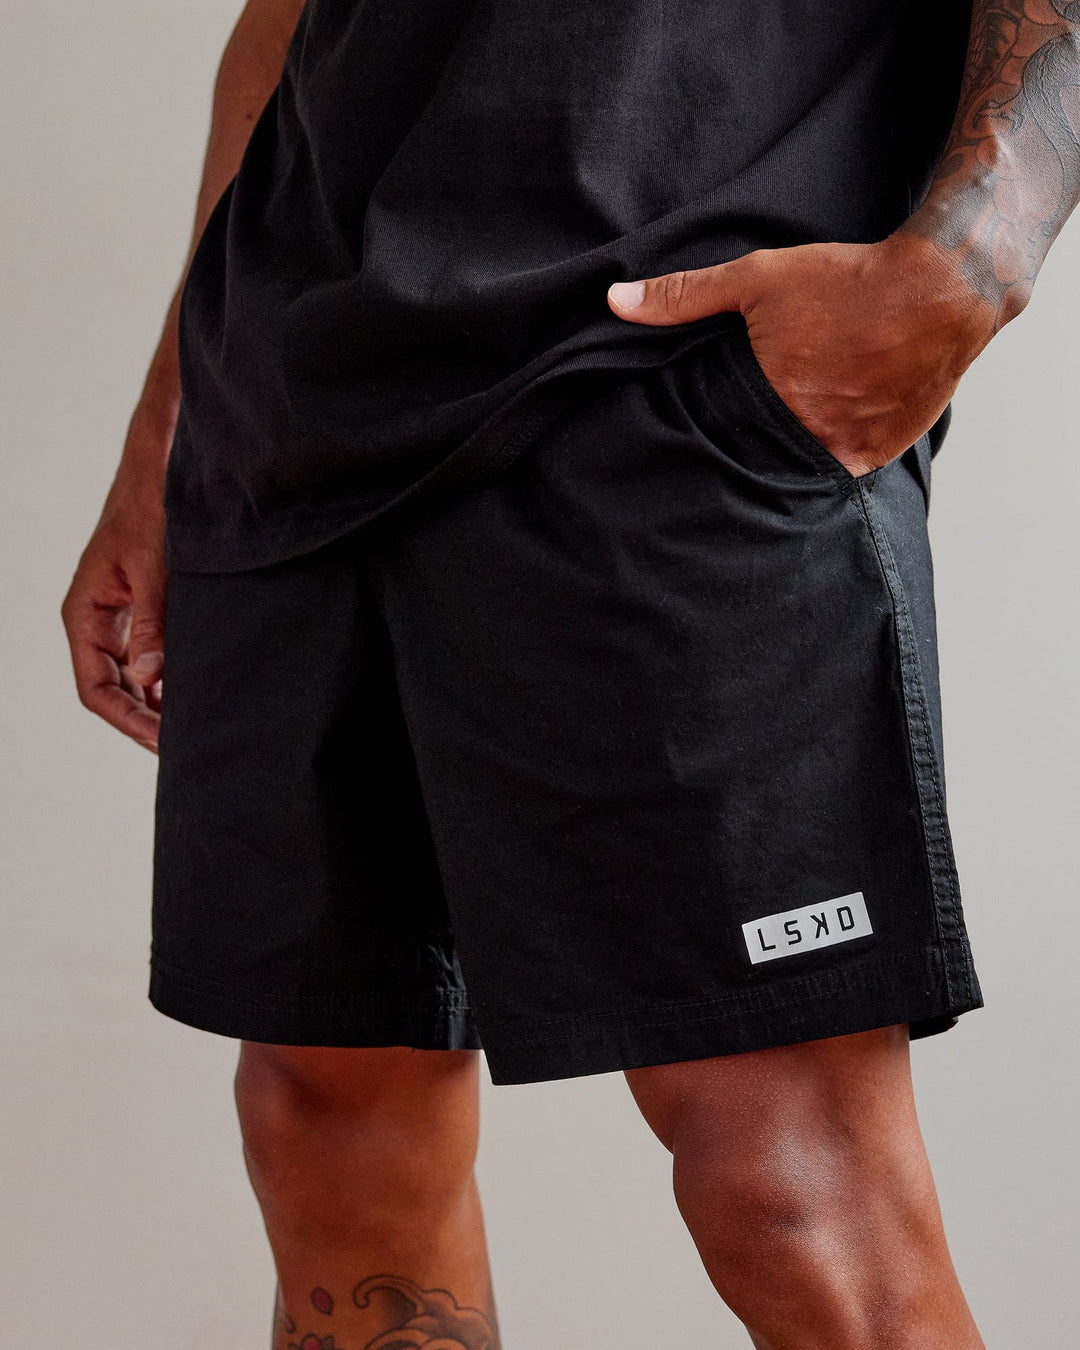 Pace 5 Lined Performance Shorts - Black-Reflective